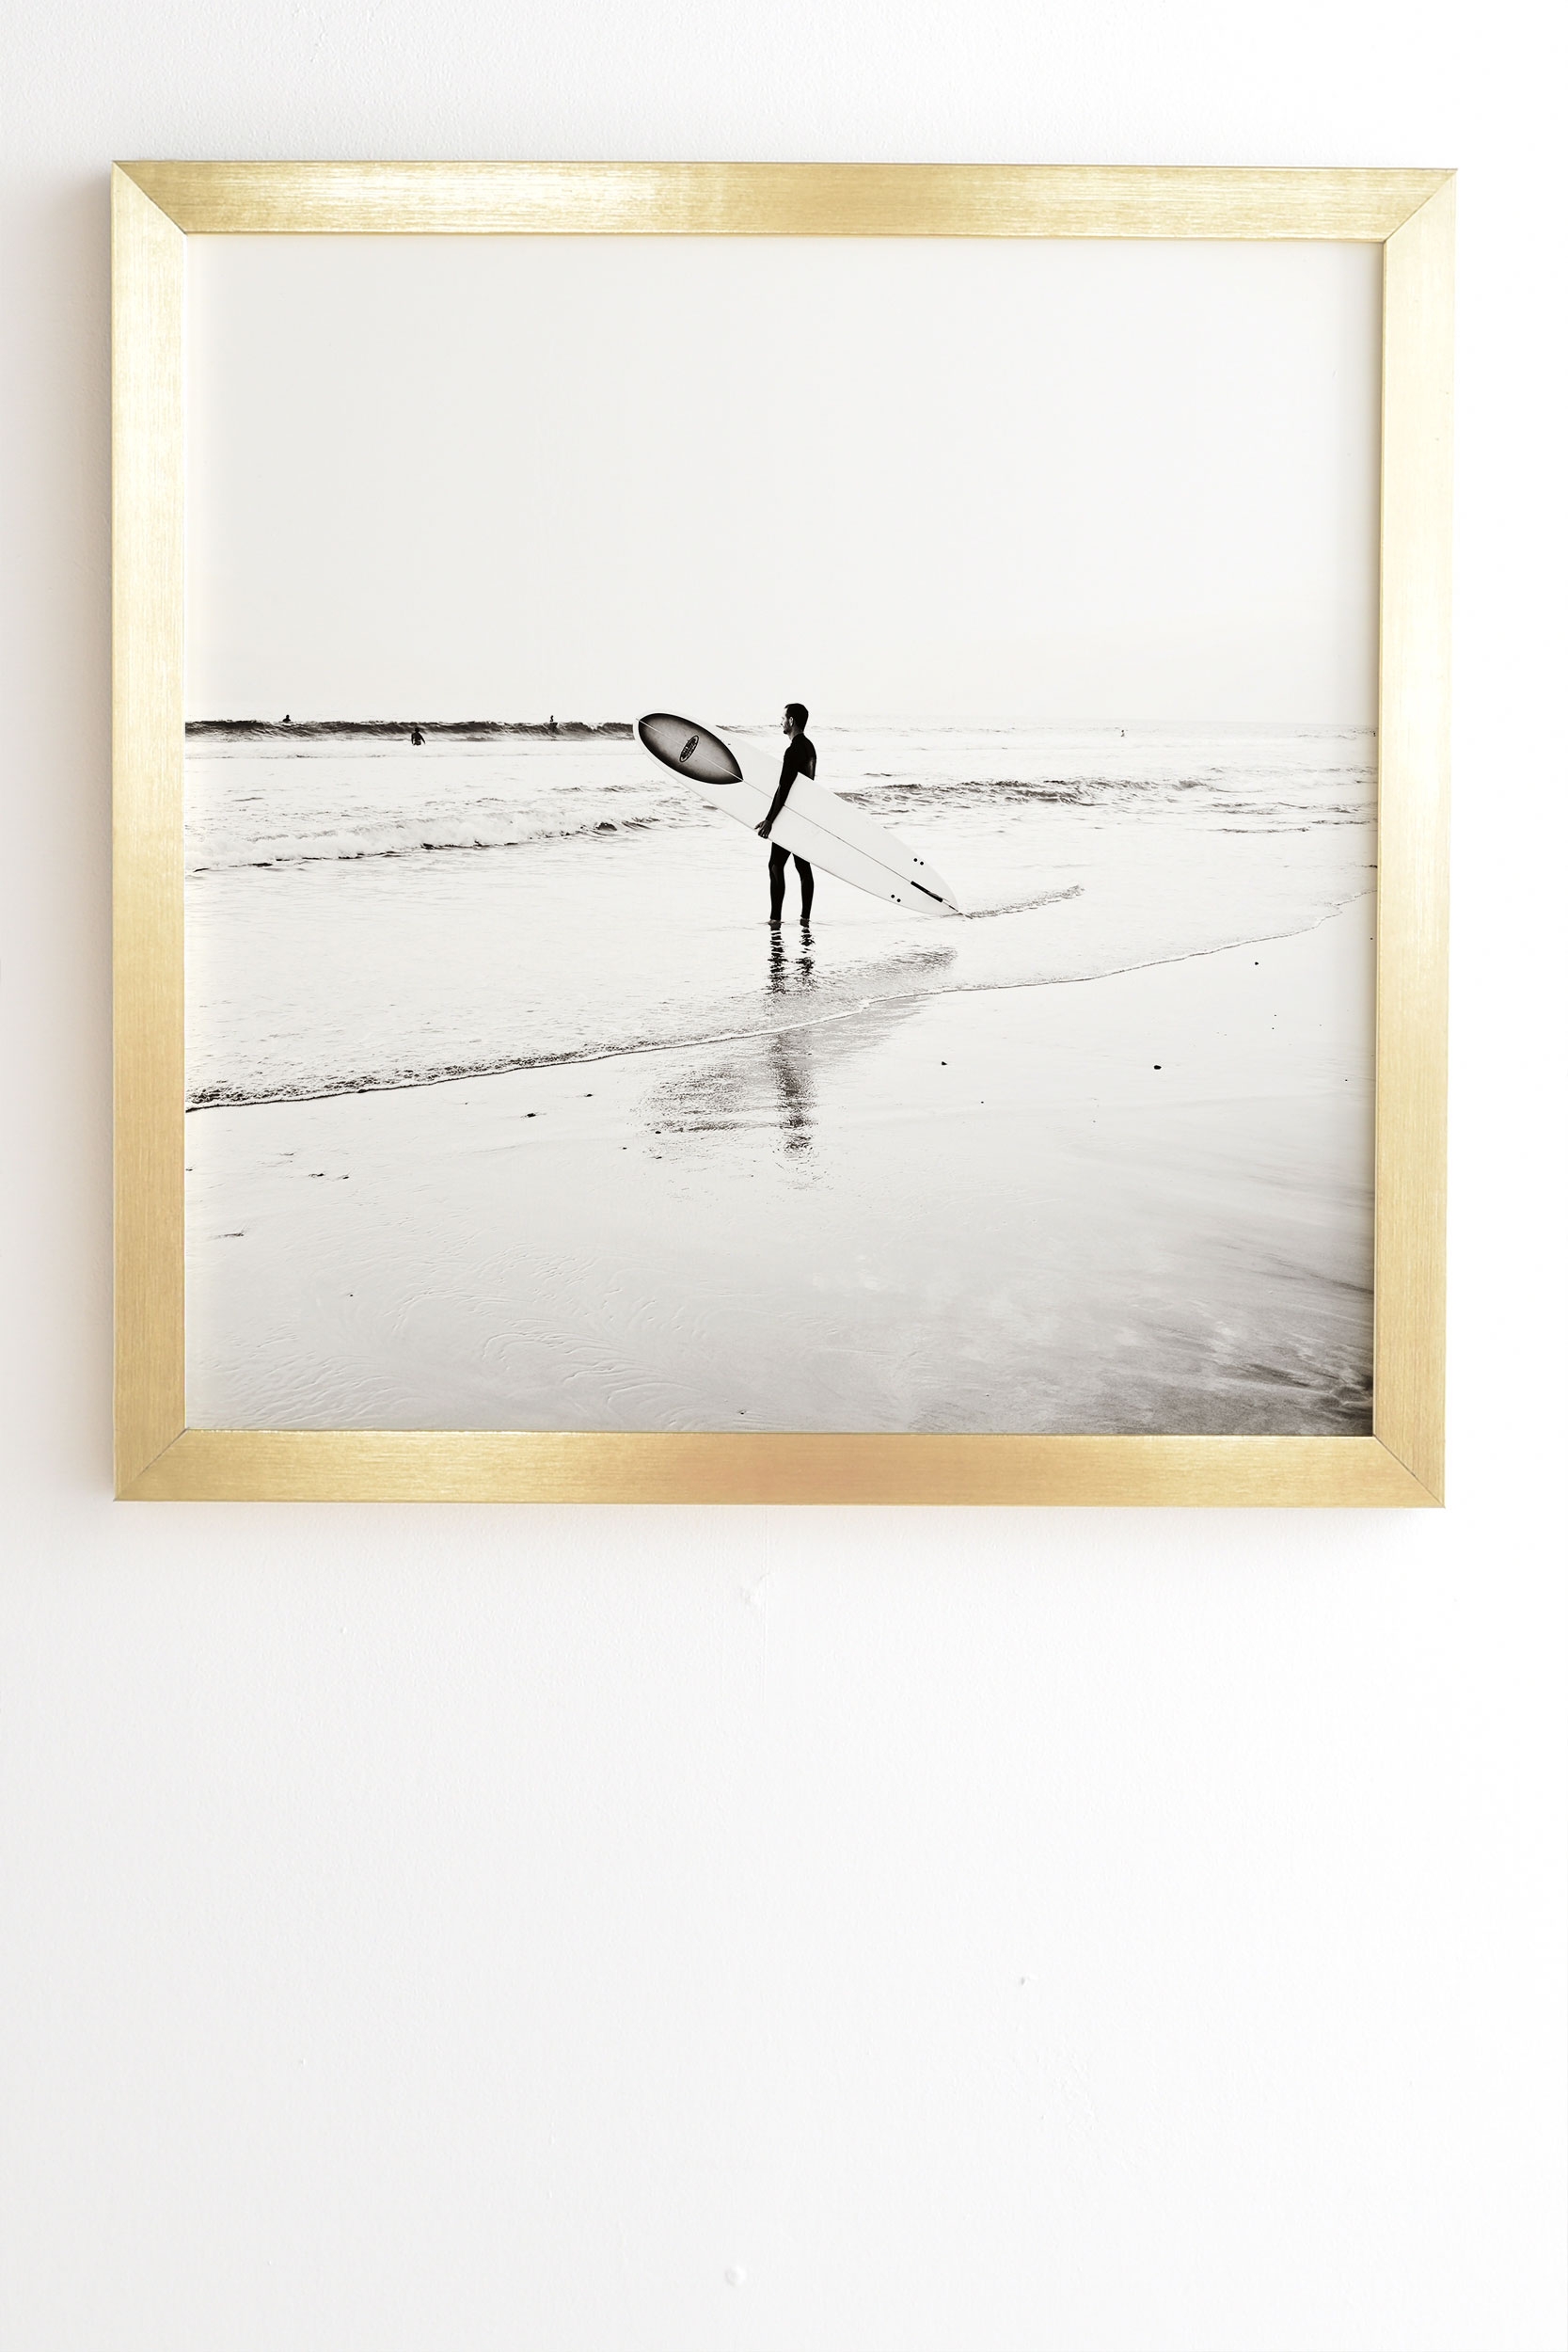 Surf Check by Bree Madden - Framed Wall Art Basic Gold 14" x 16.5" - Image 1